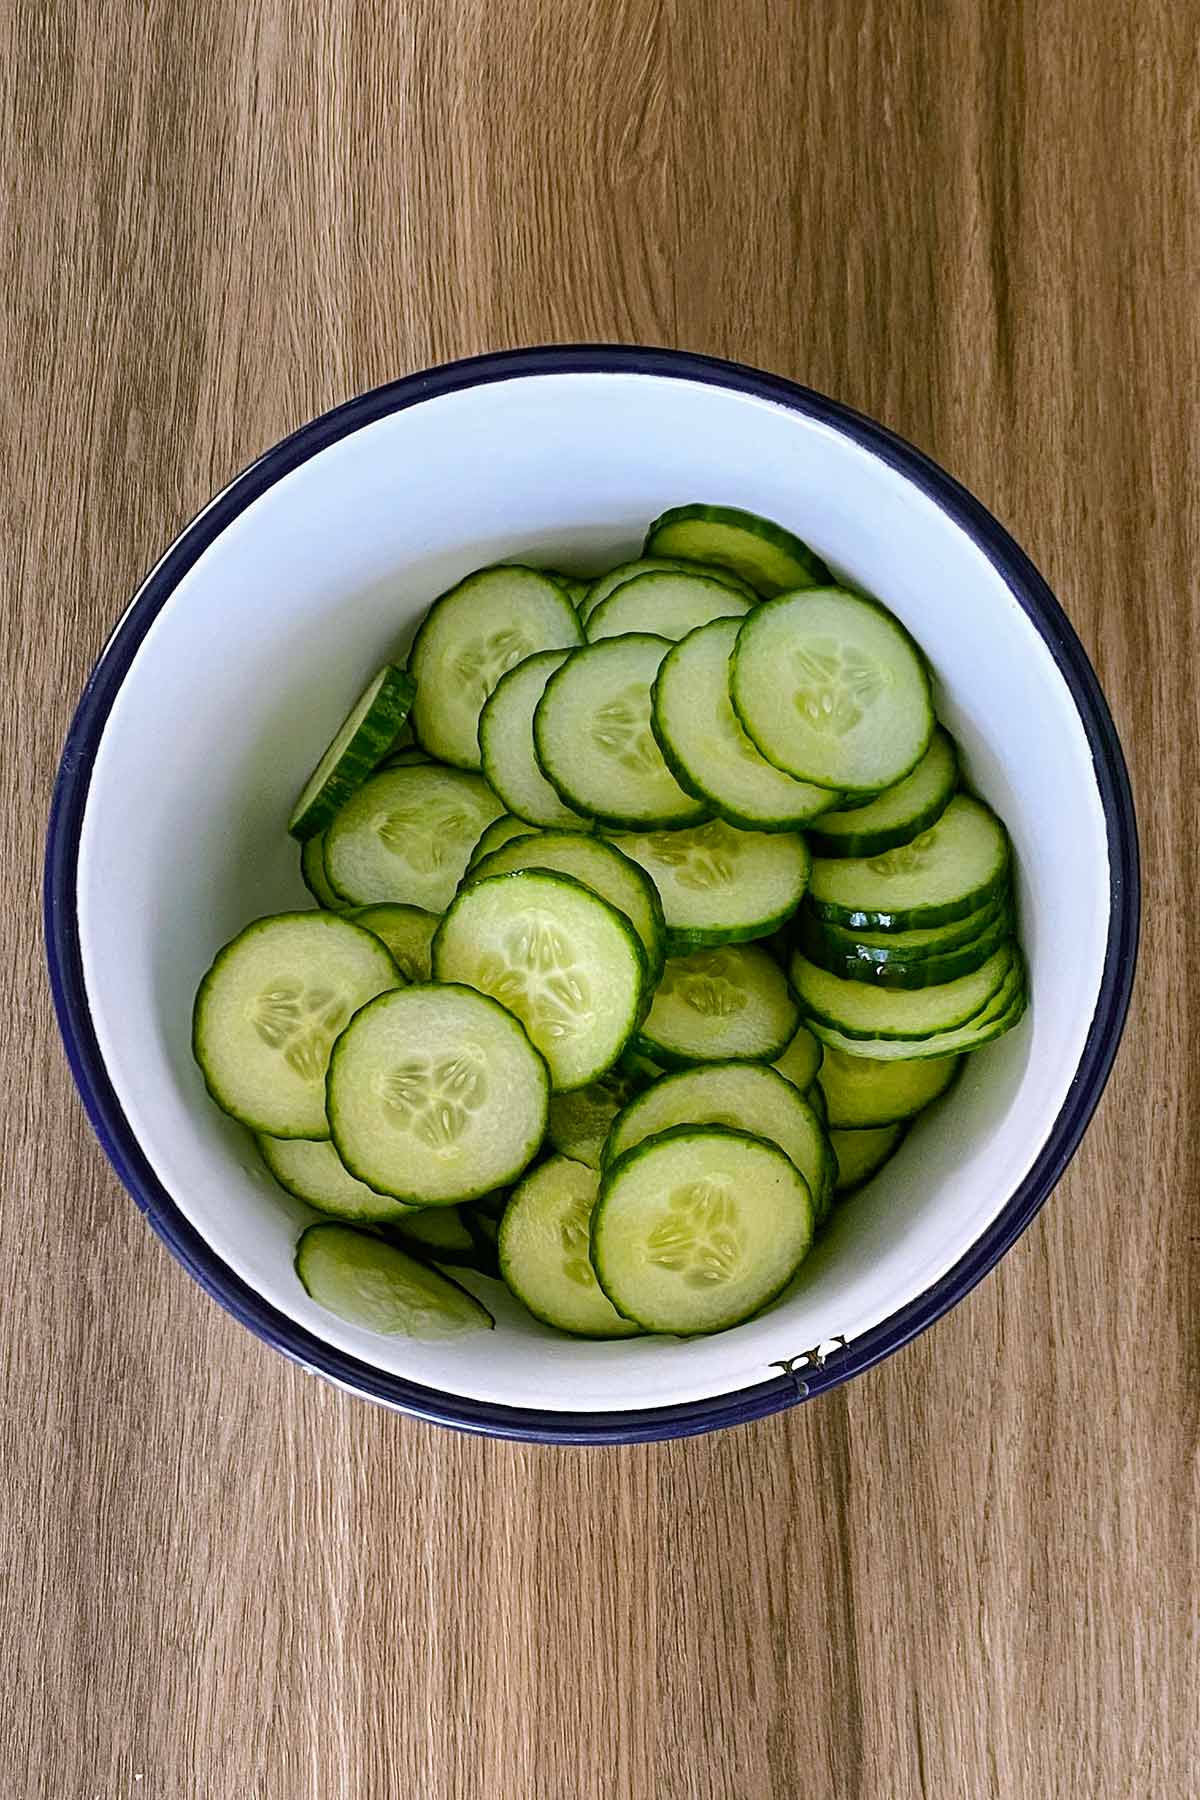 A bowl containing slices of cucumber.